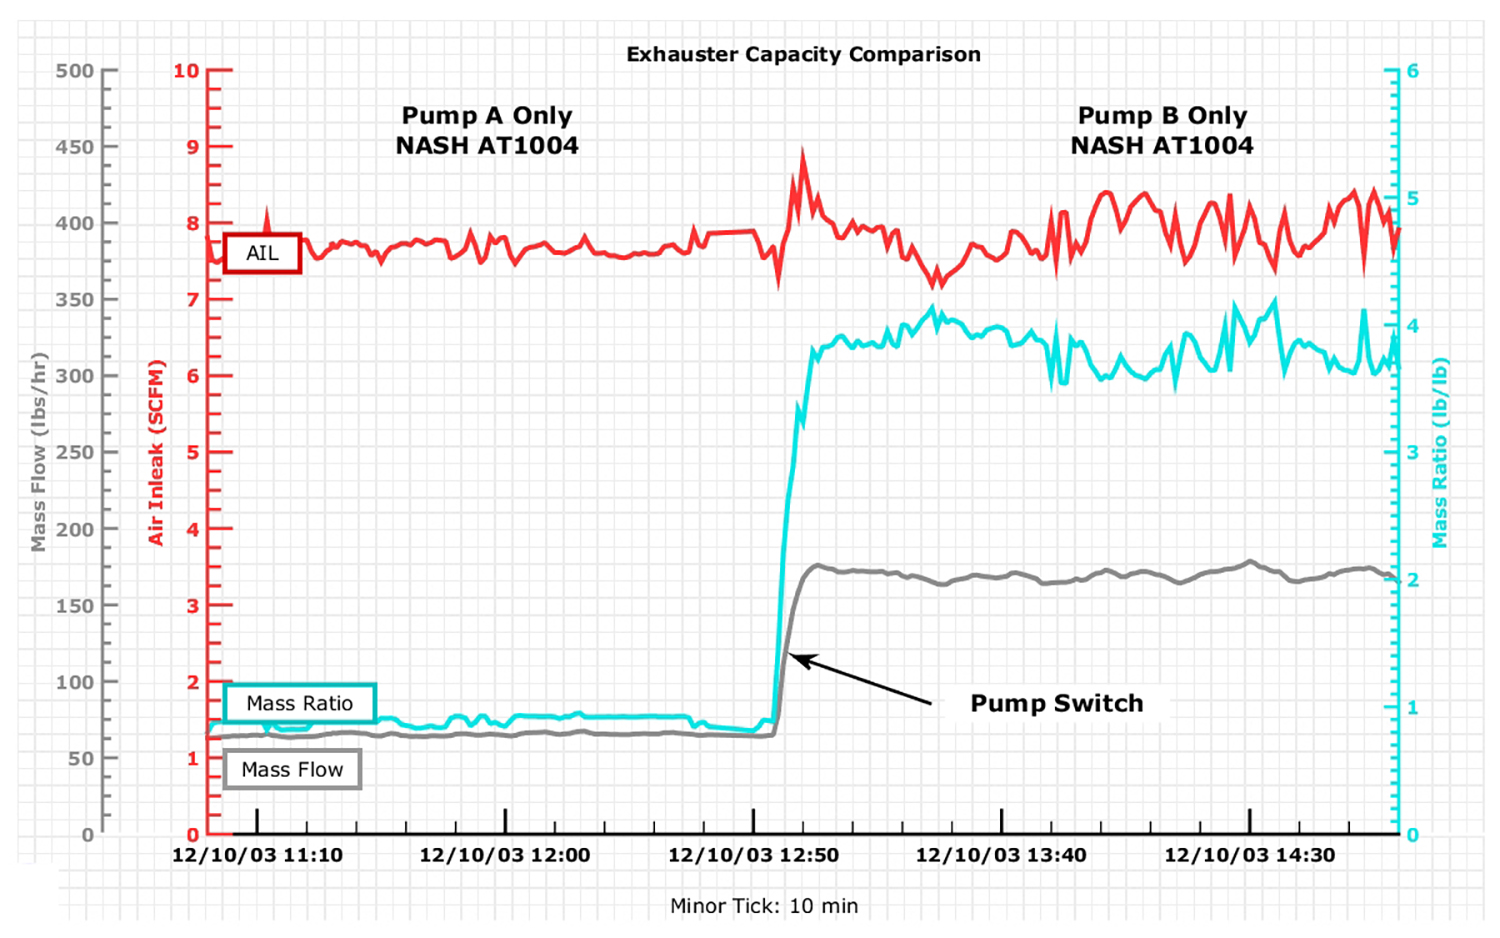 IMAGE 3: Air in-leak, mass flow and water-to-air mass ratio for the pump set used in the  capacity comparison test